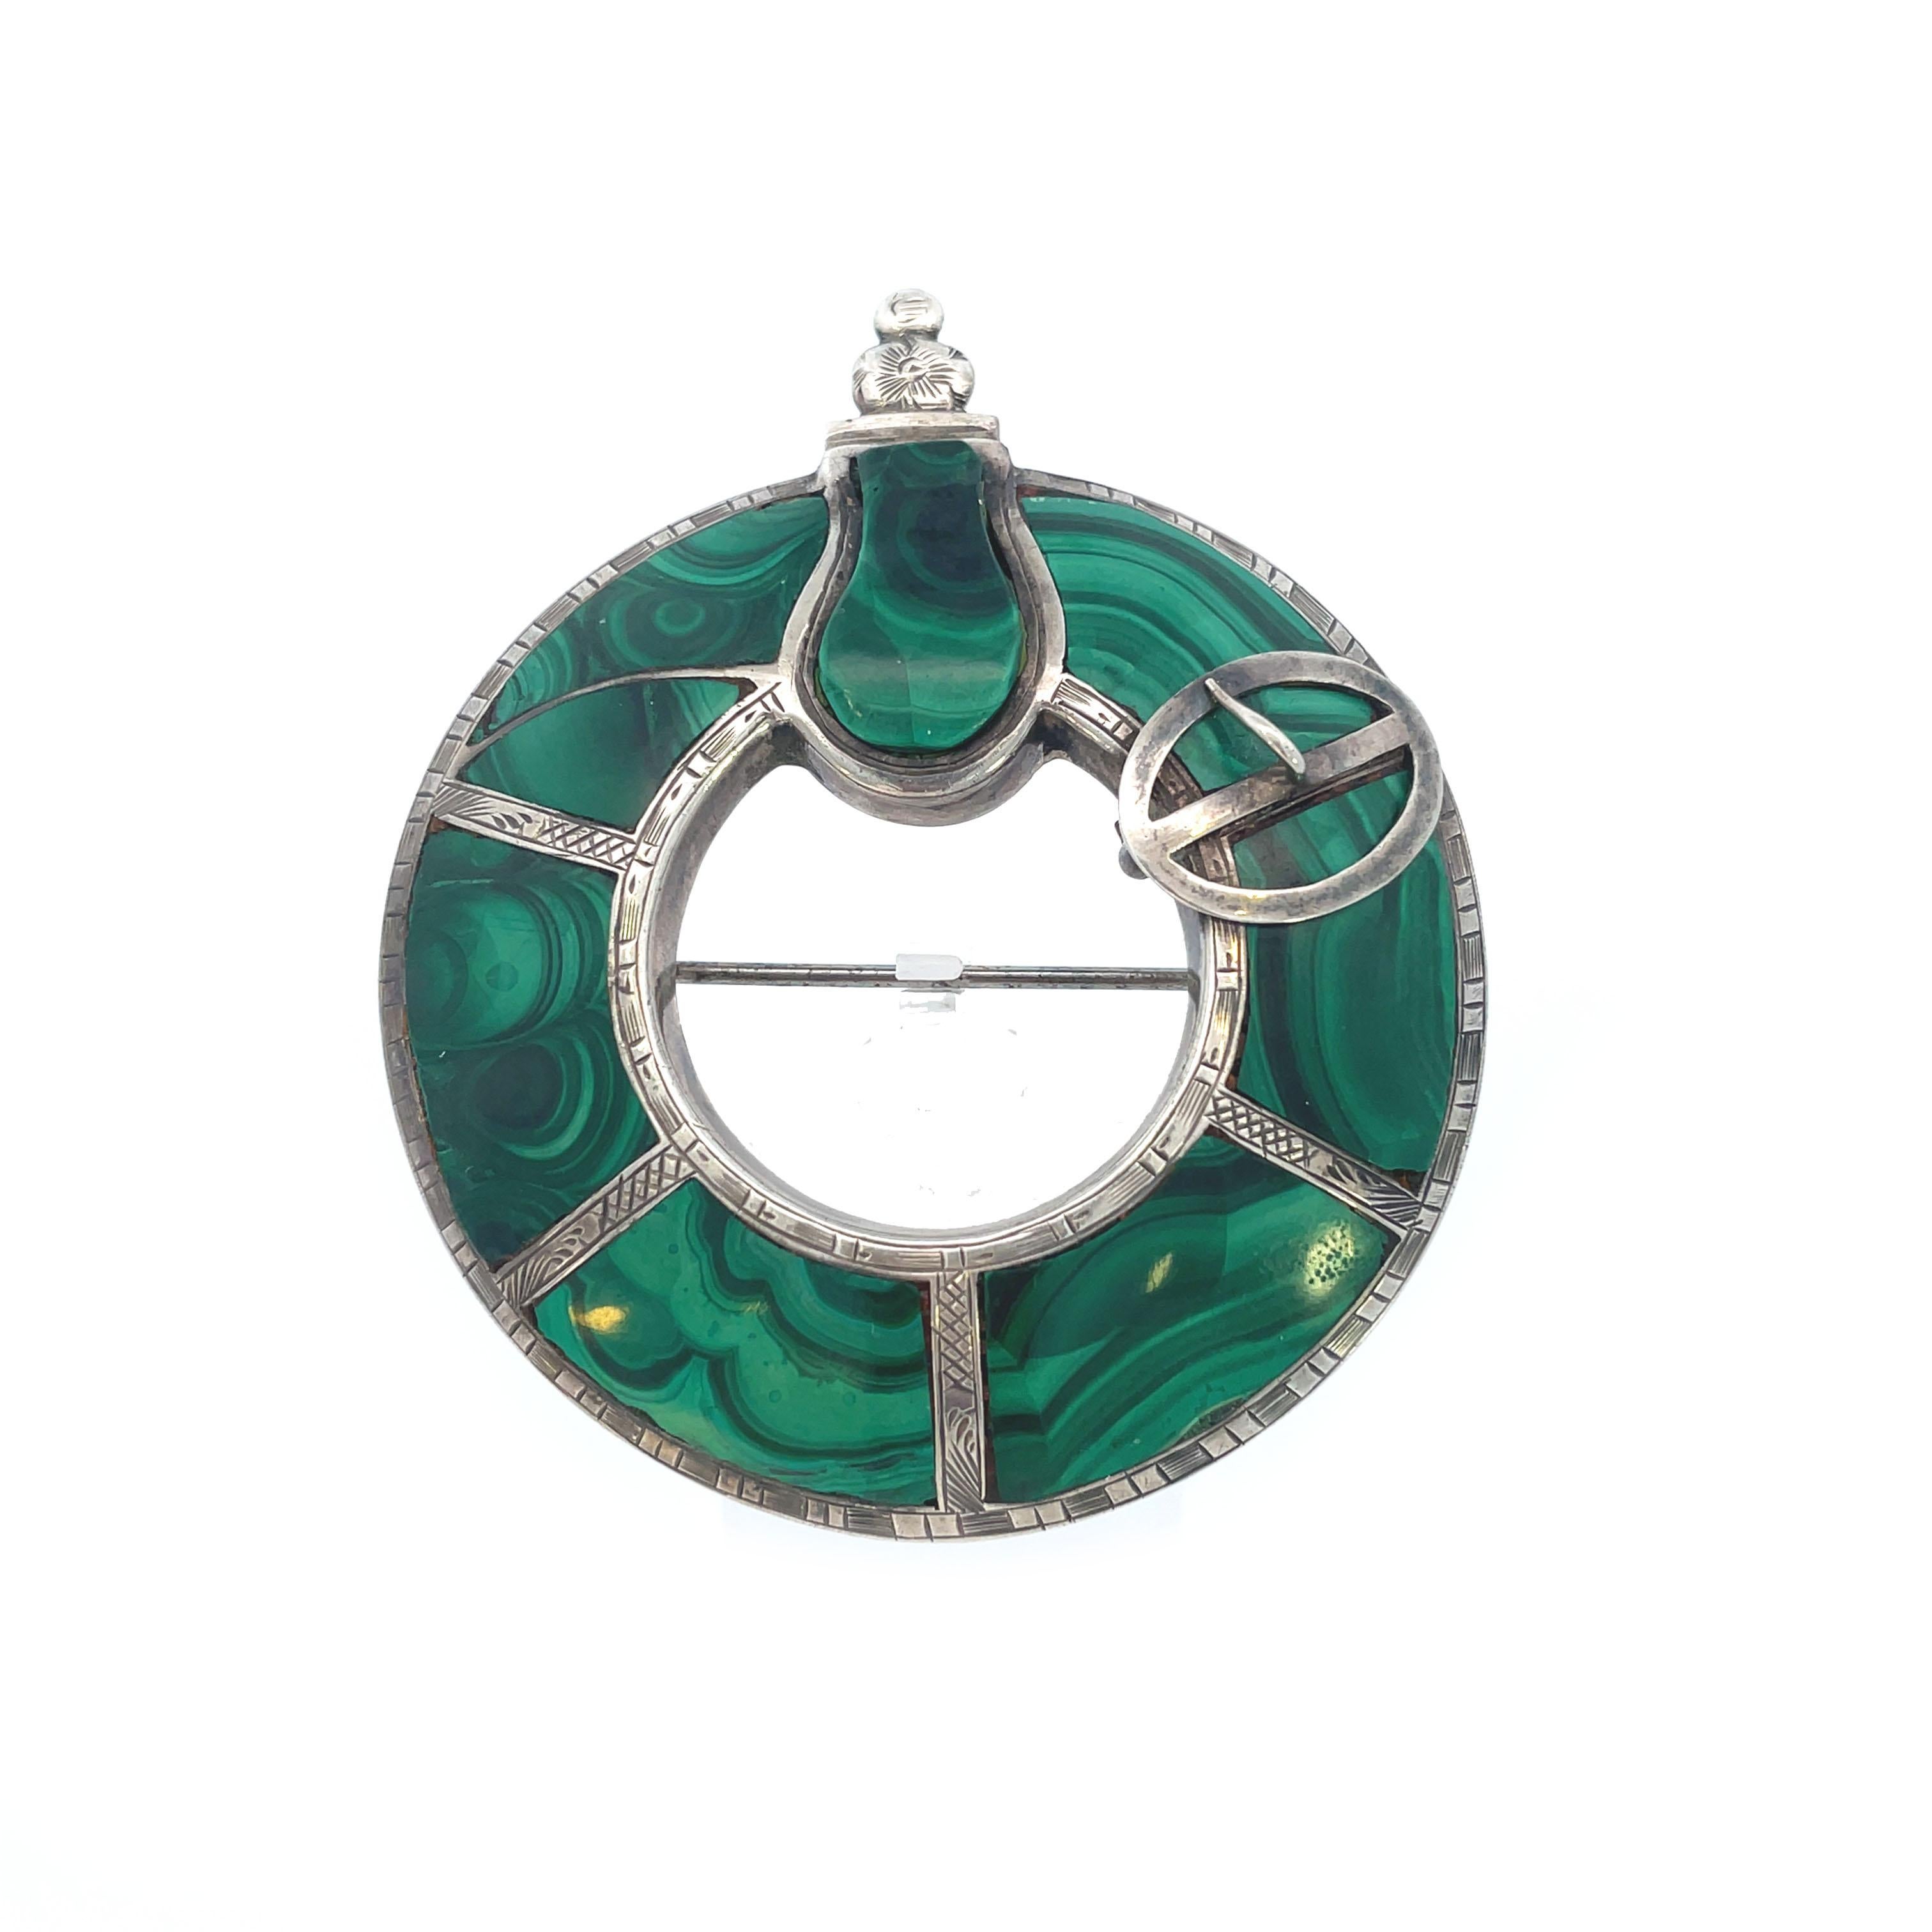 This is a super unique Victorian pin crafted in sterling silver that features vibrant green Malachite. Bordered in bright sterling silver, shaped Malachite encircles the entirety of this striking pin. Marbled and rich green Malachite split between